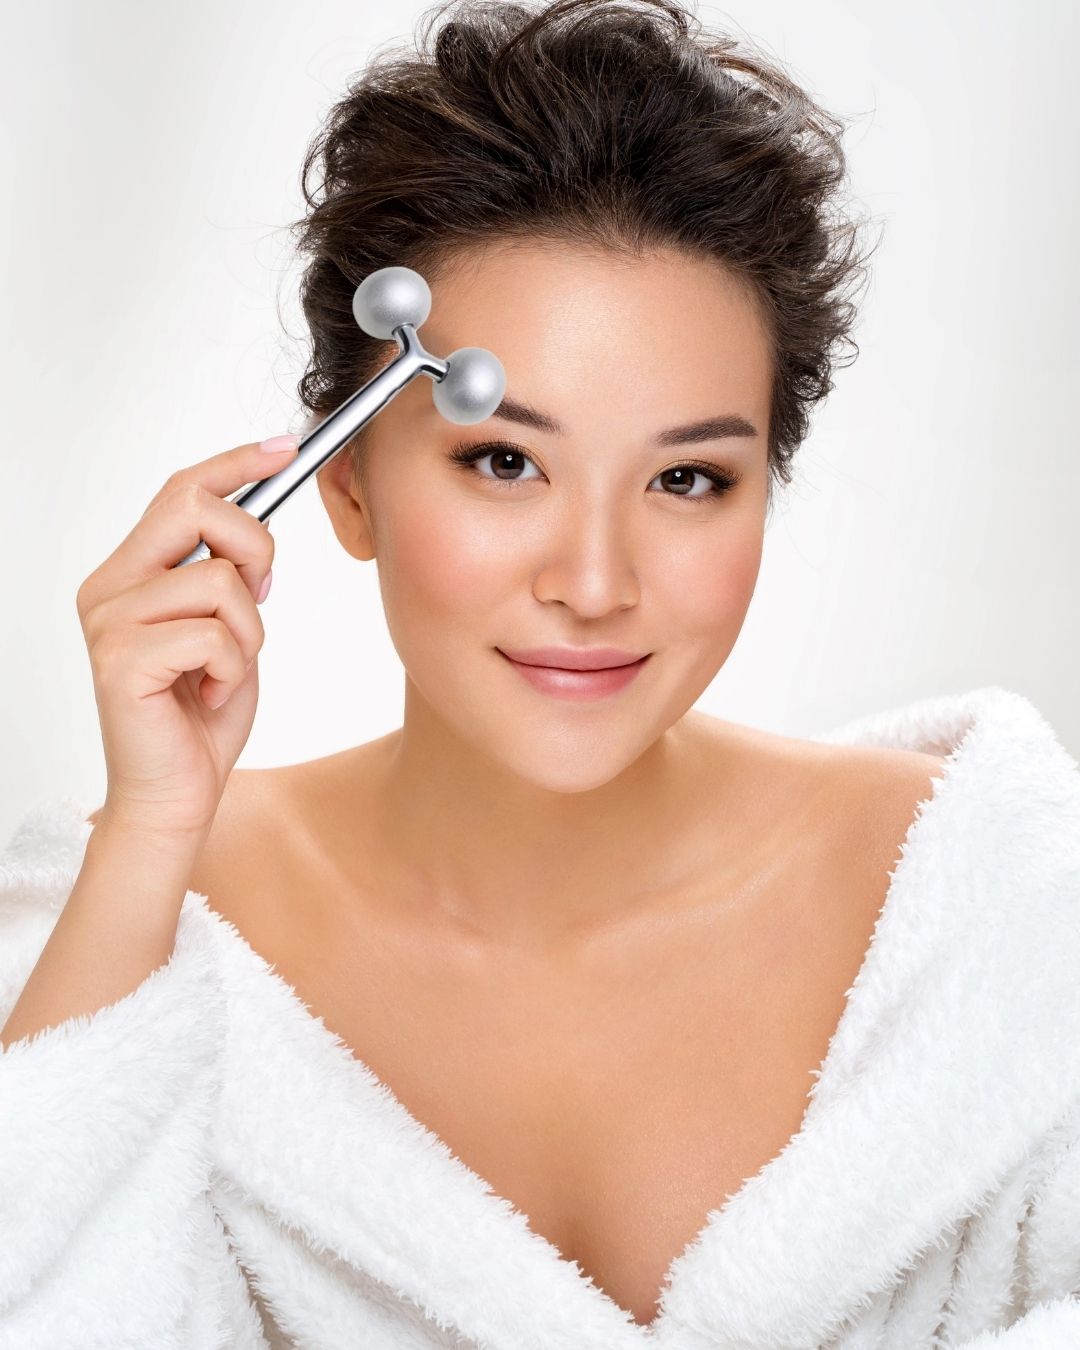 women with face roller